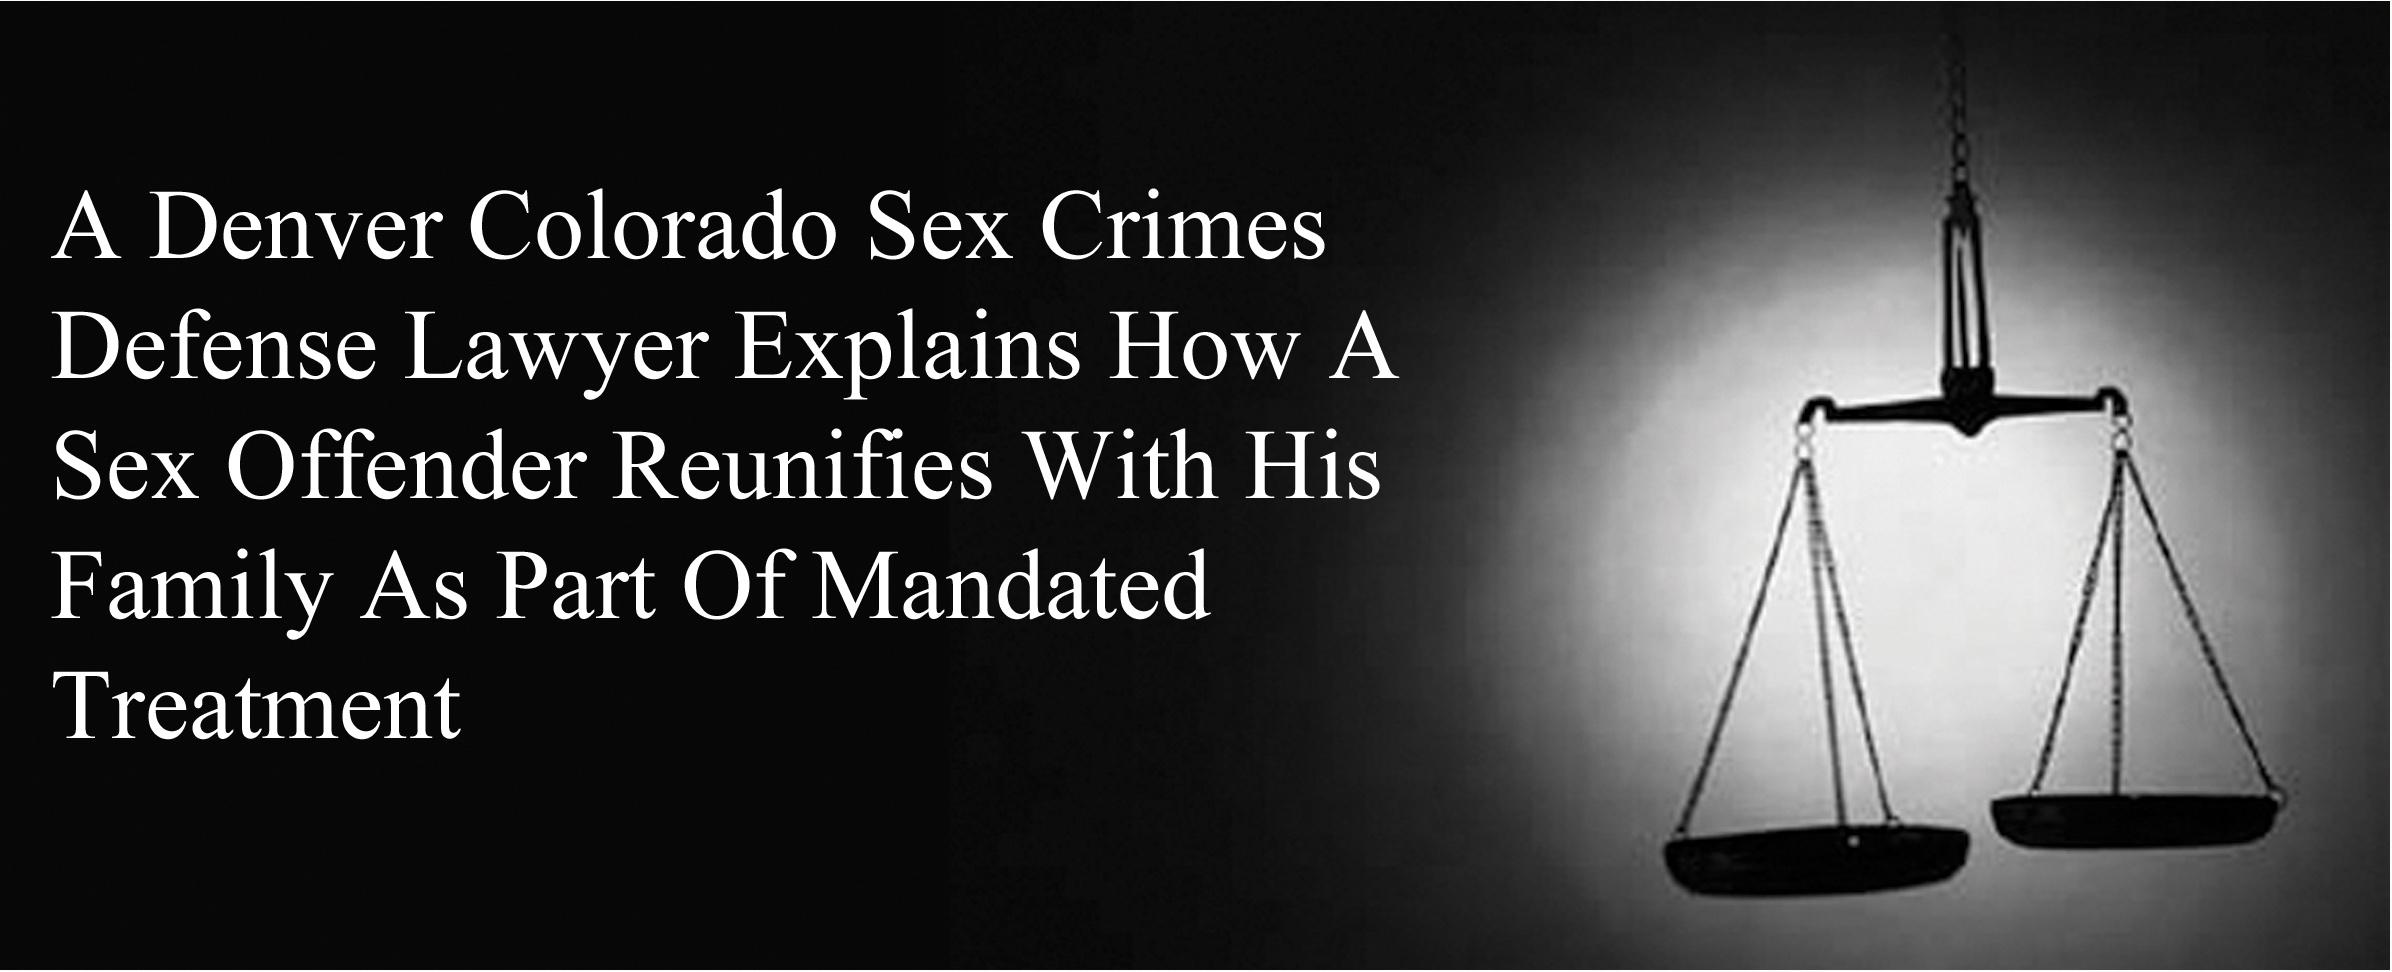 A Denver Colorado Sex Crimes Defense Lawyer Explains How A Sex Offender Reunifies With His Family As Part Of Mandated Treatment Colorado Sex Crimes Lawyer pic